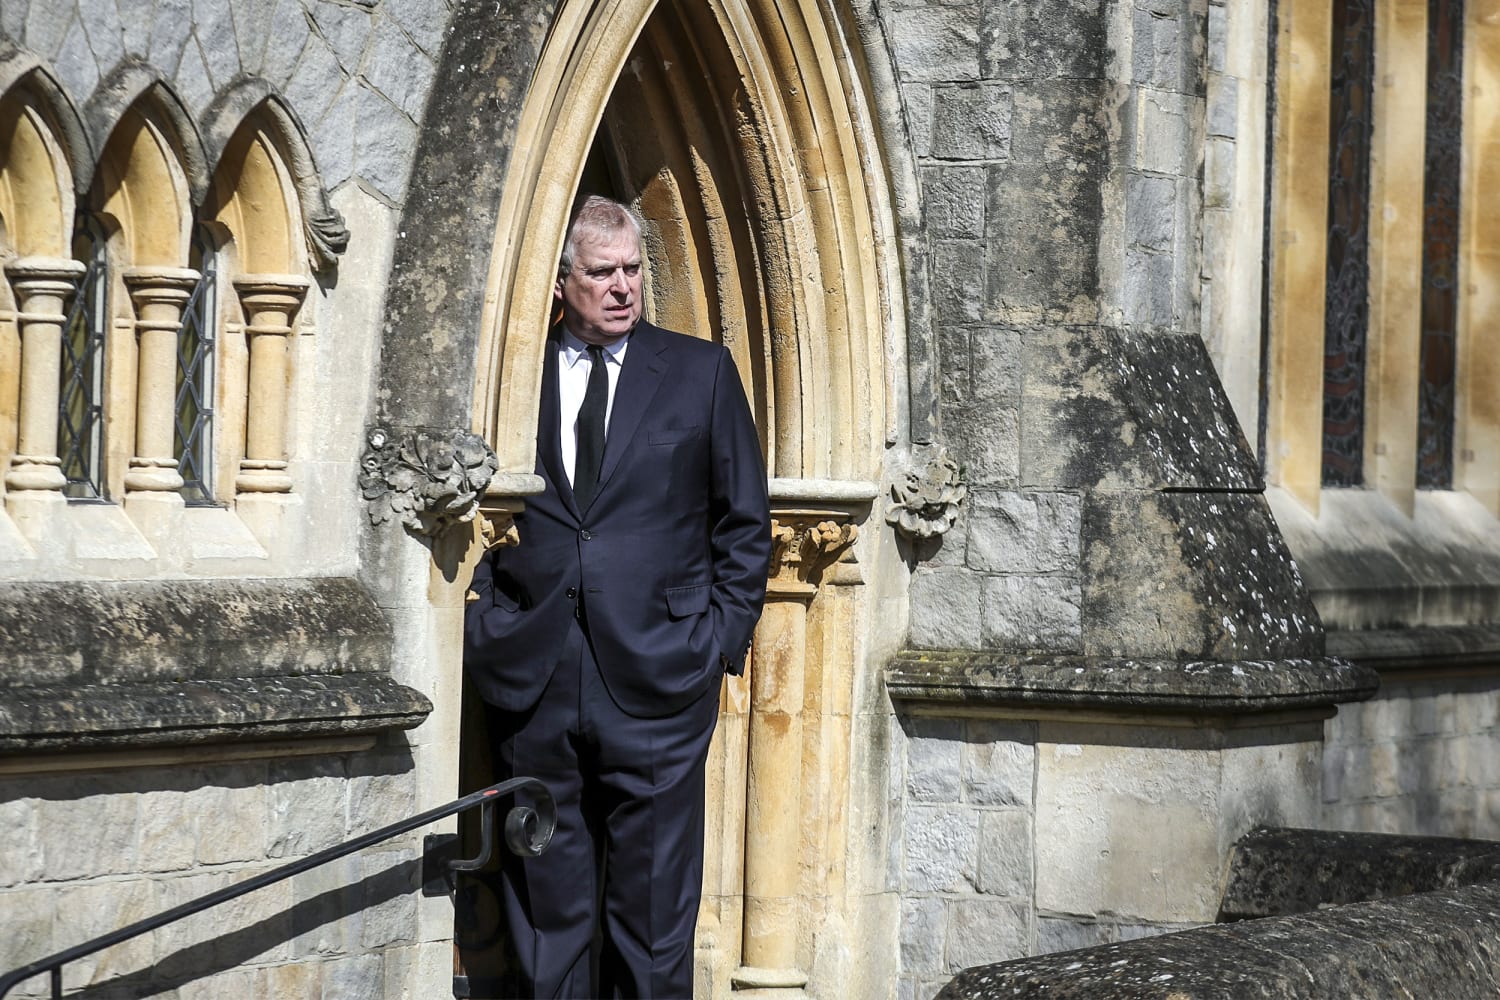 Prince Andrew launches legal gambit to derail sex abuse suit